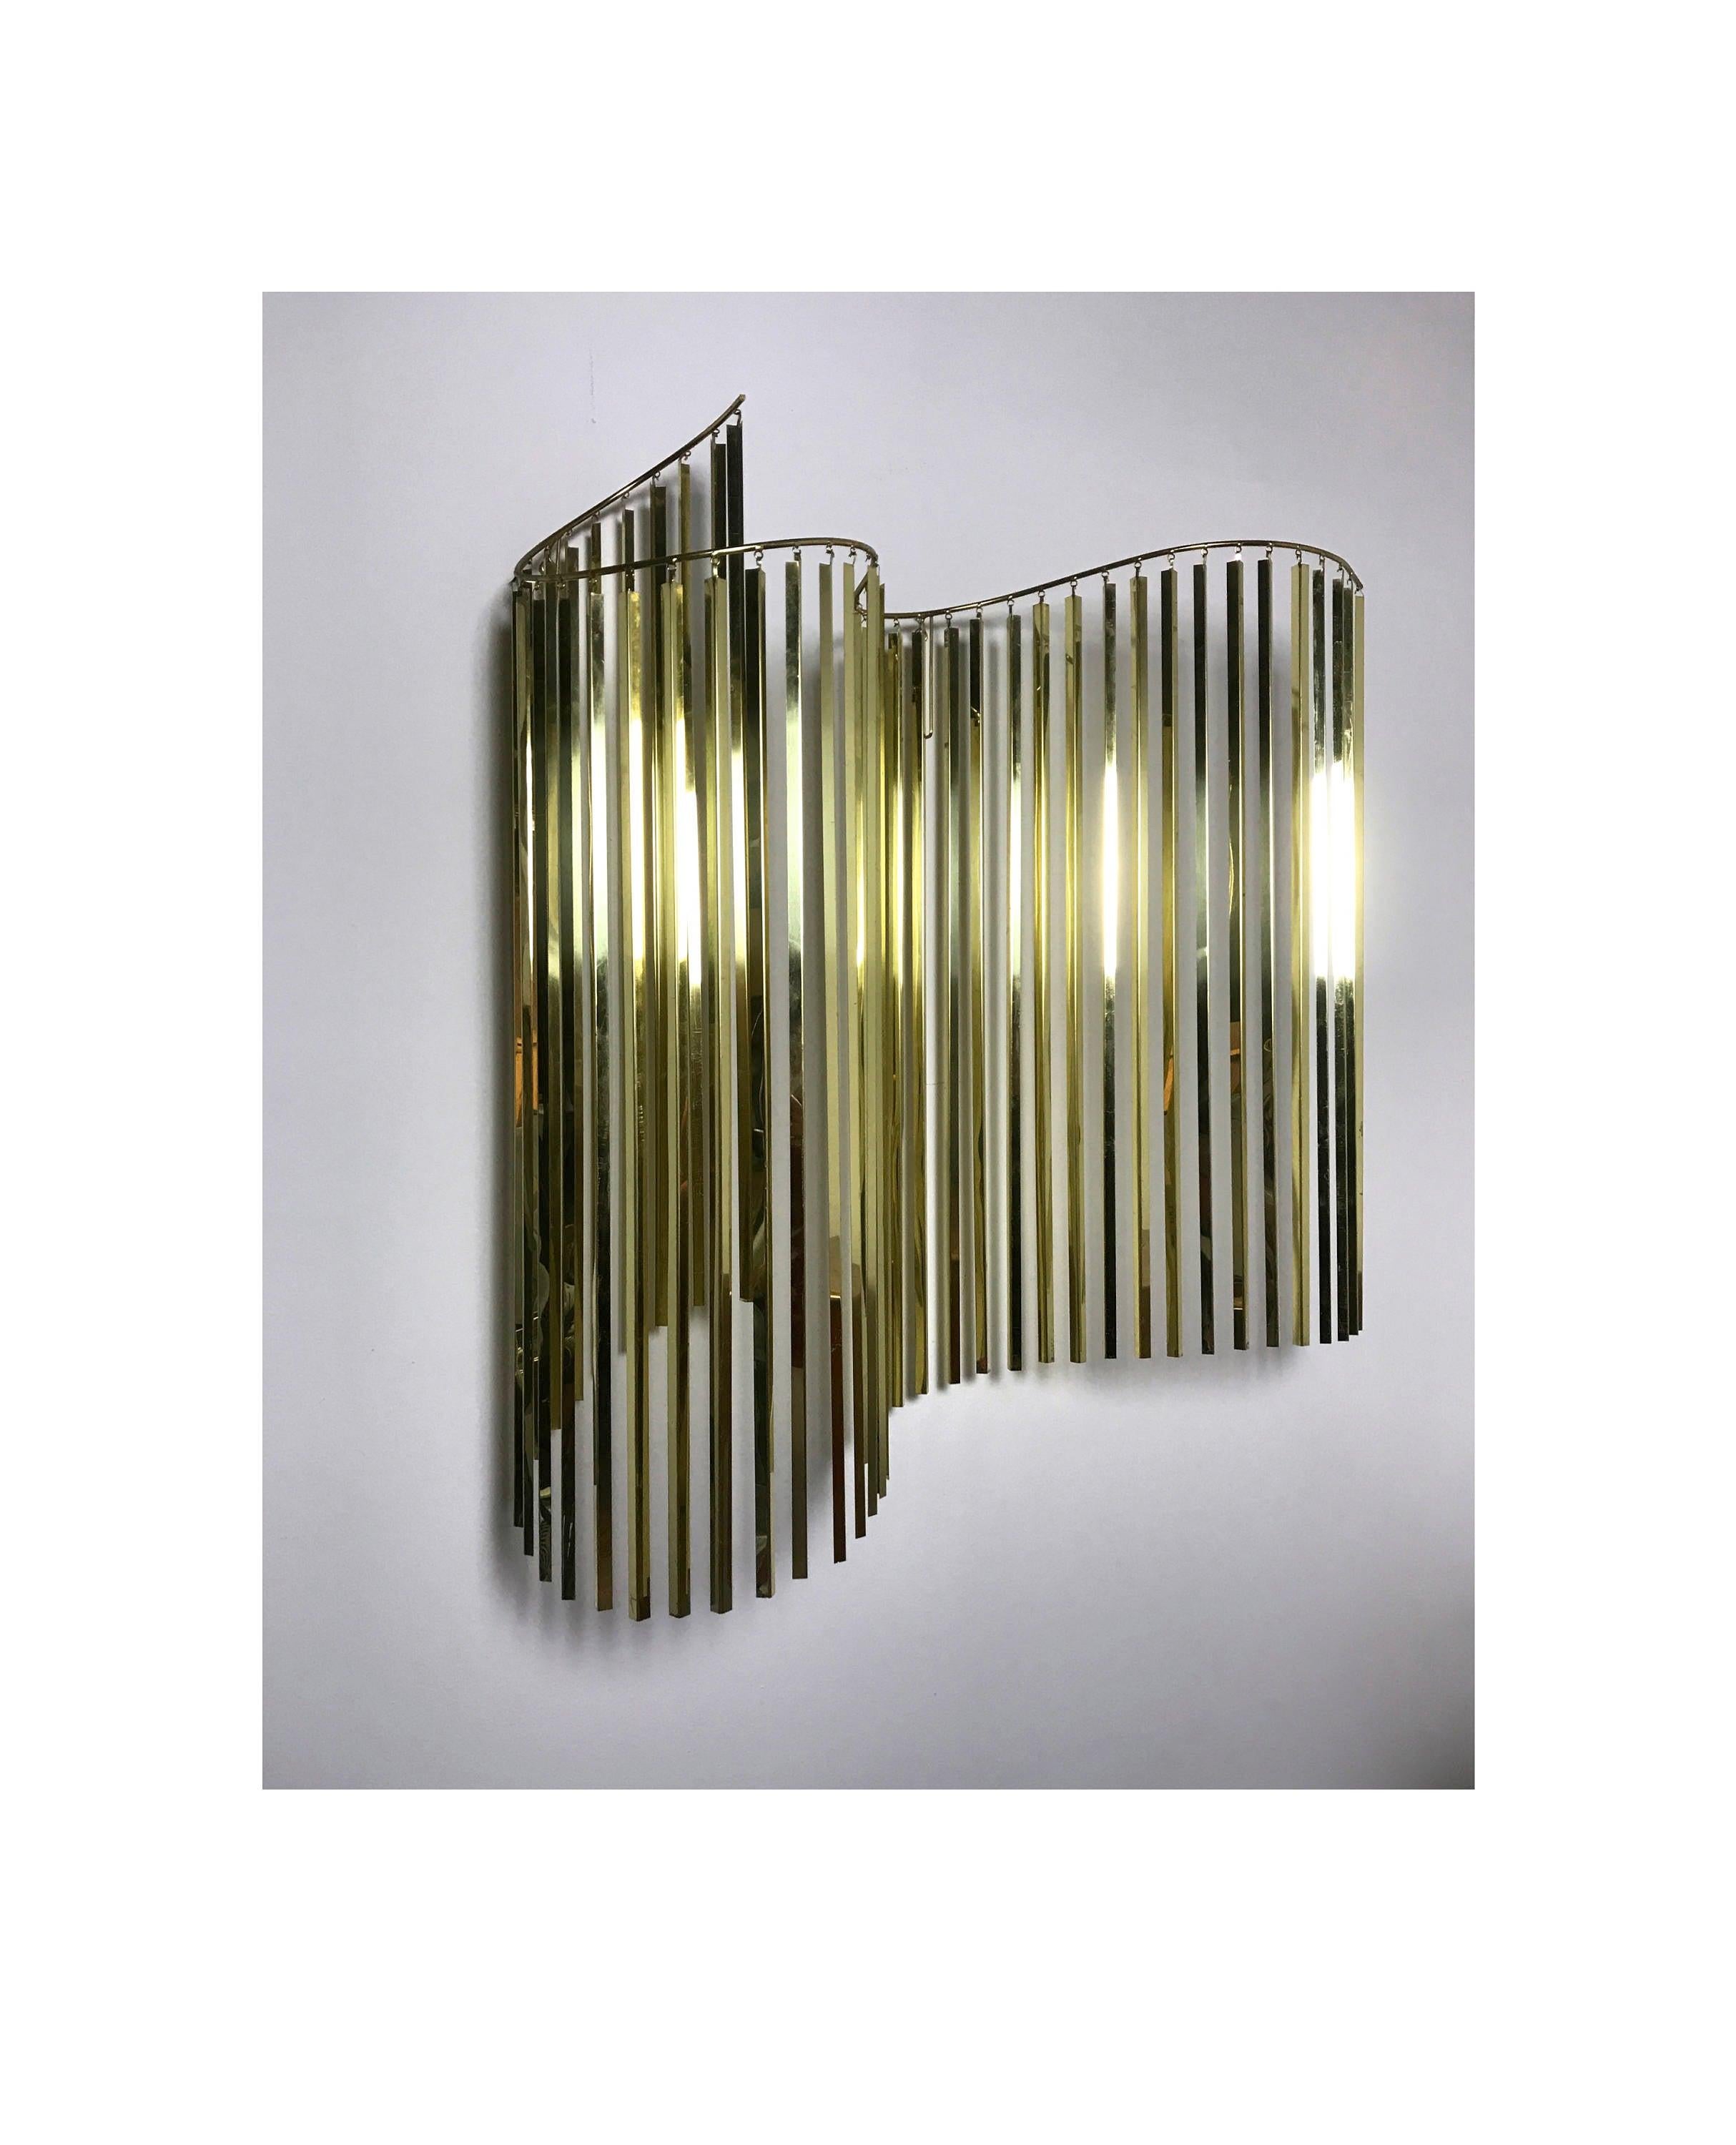 Brass Curtis Jere Kinetic Wave Wall Sculpture For Sale